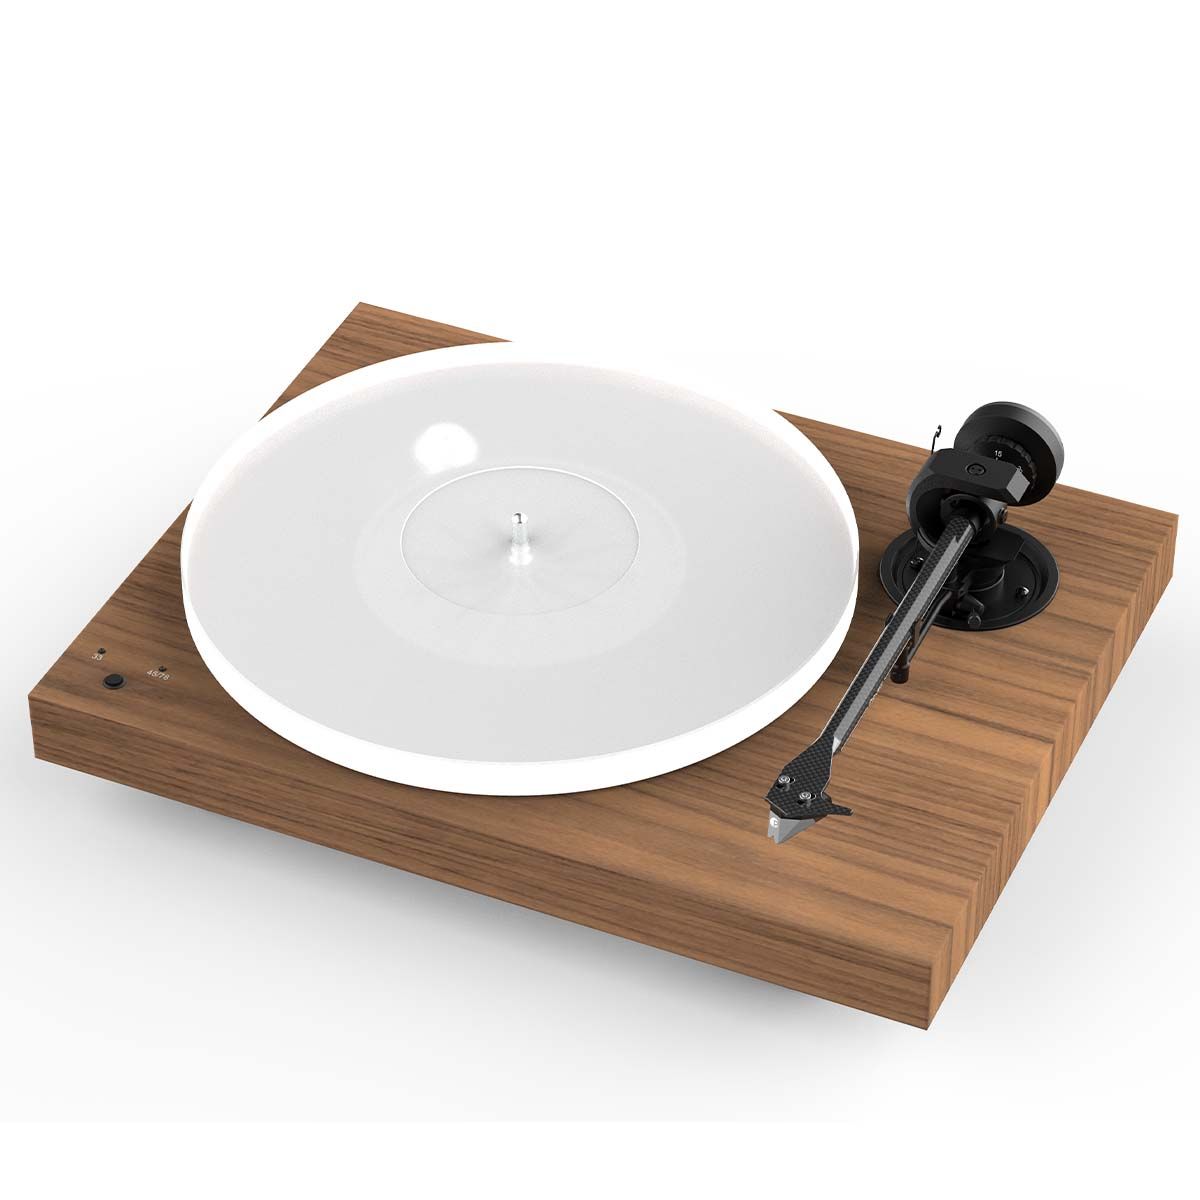 Pro-Ject X1B True Balanced Turntable - angled front view of satin walnut